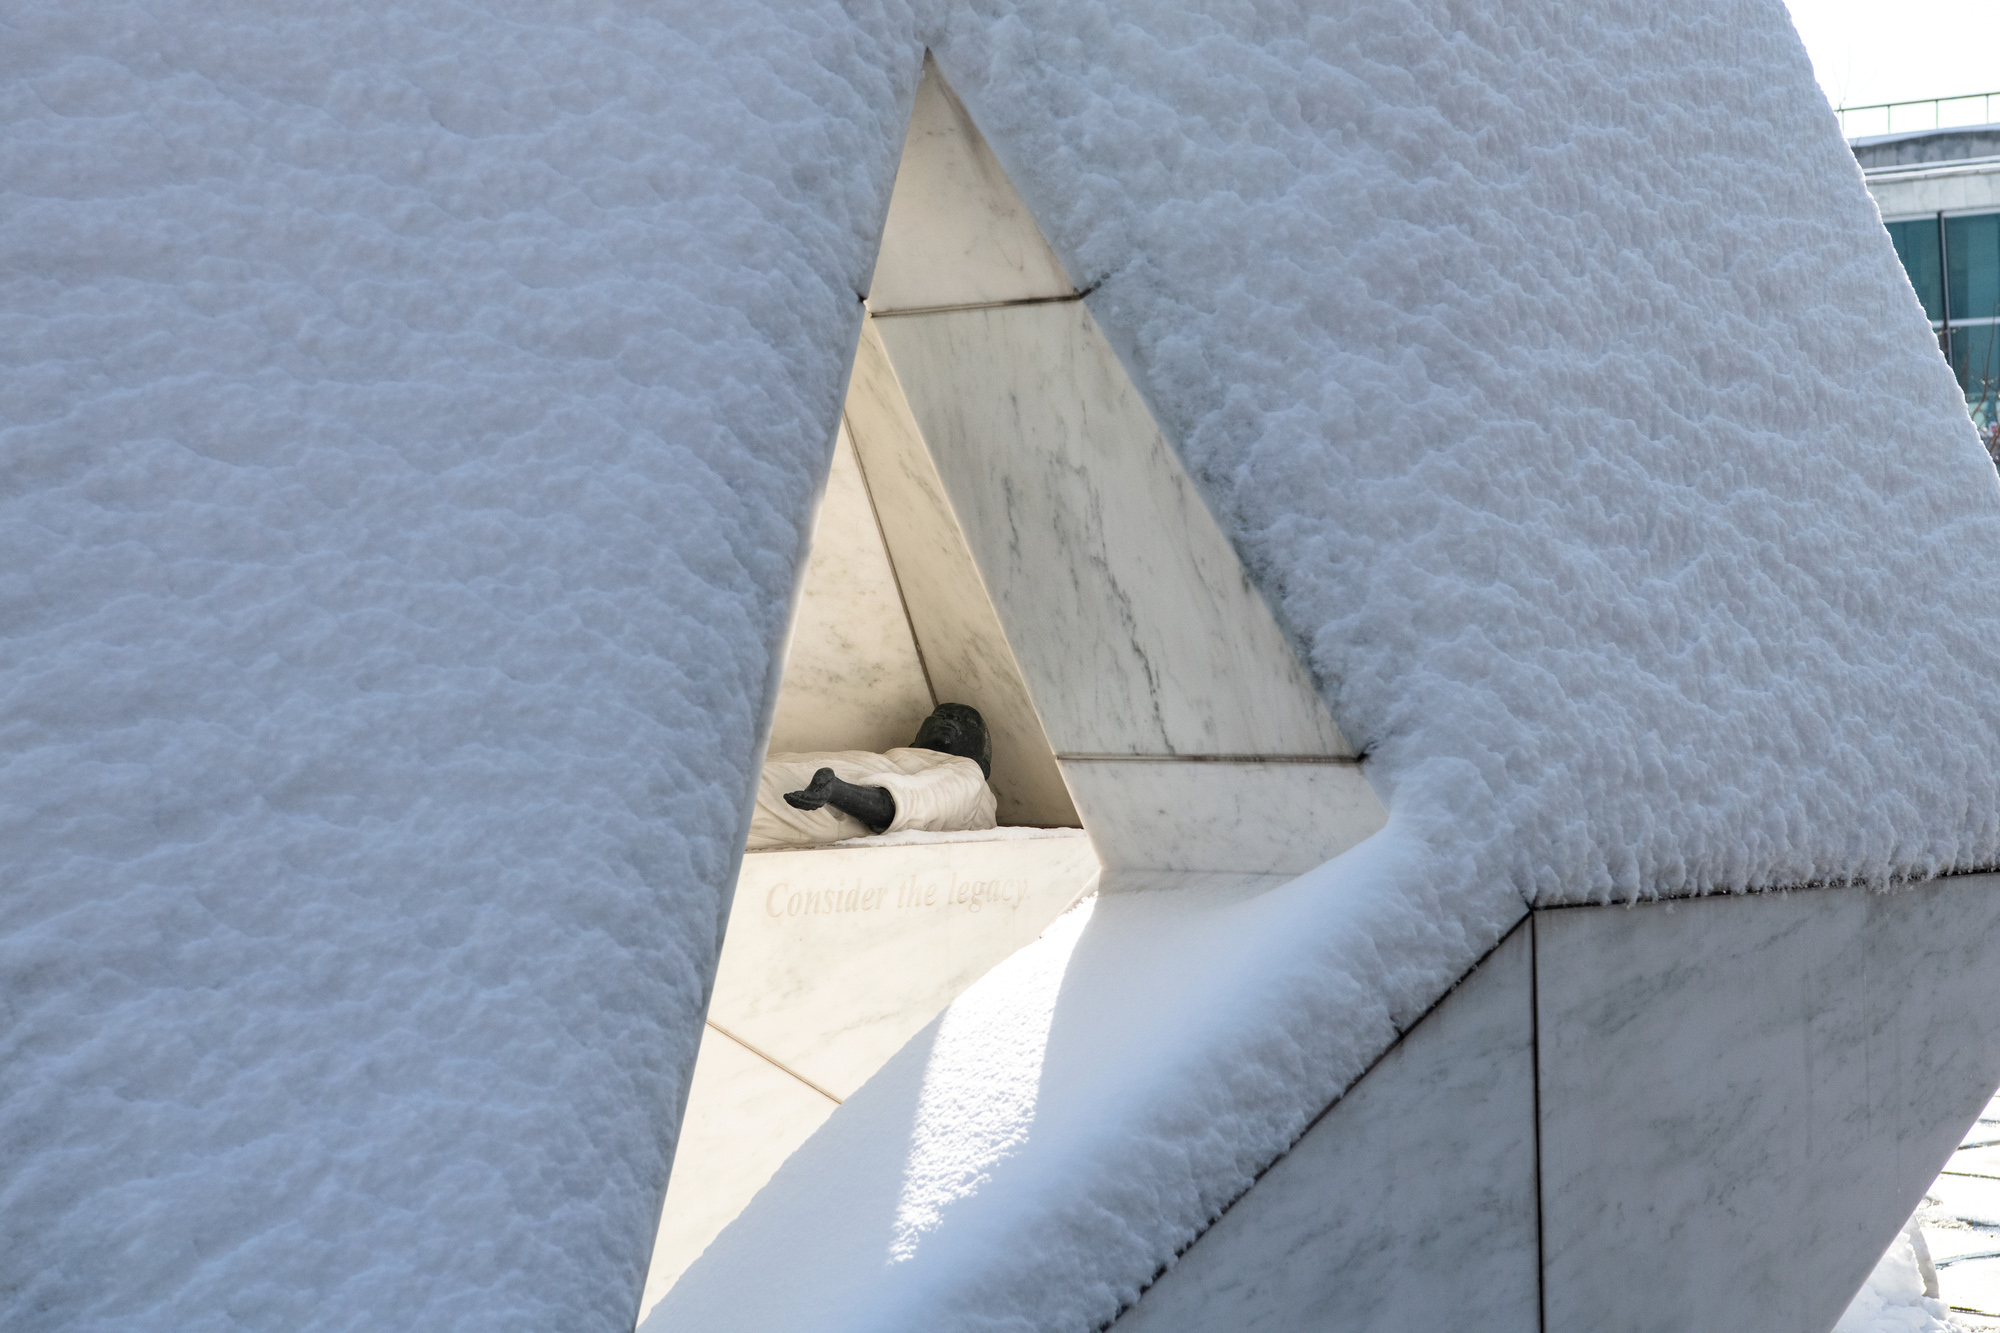 A view of the Ark of Return at UN Headquarters in snow. The sculpture honors the victims of slavery and the transatlantic slave trade.